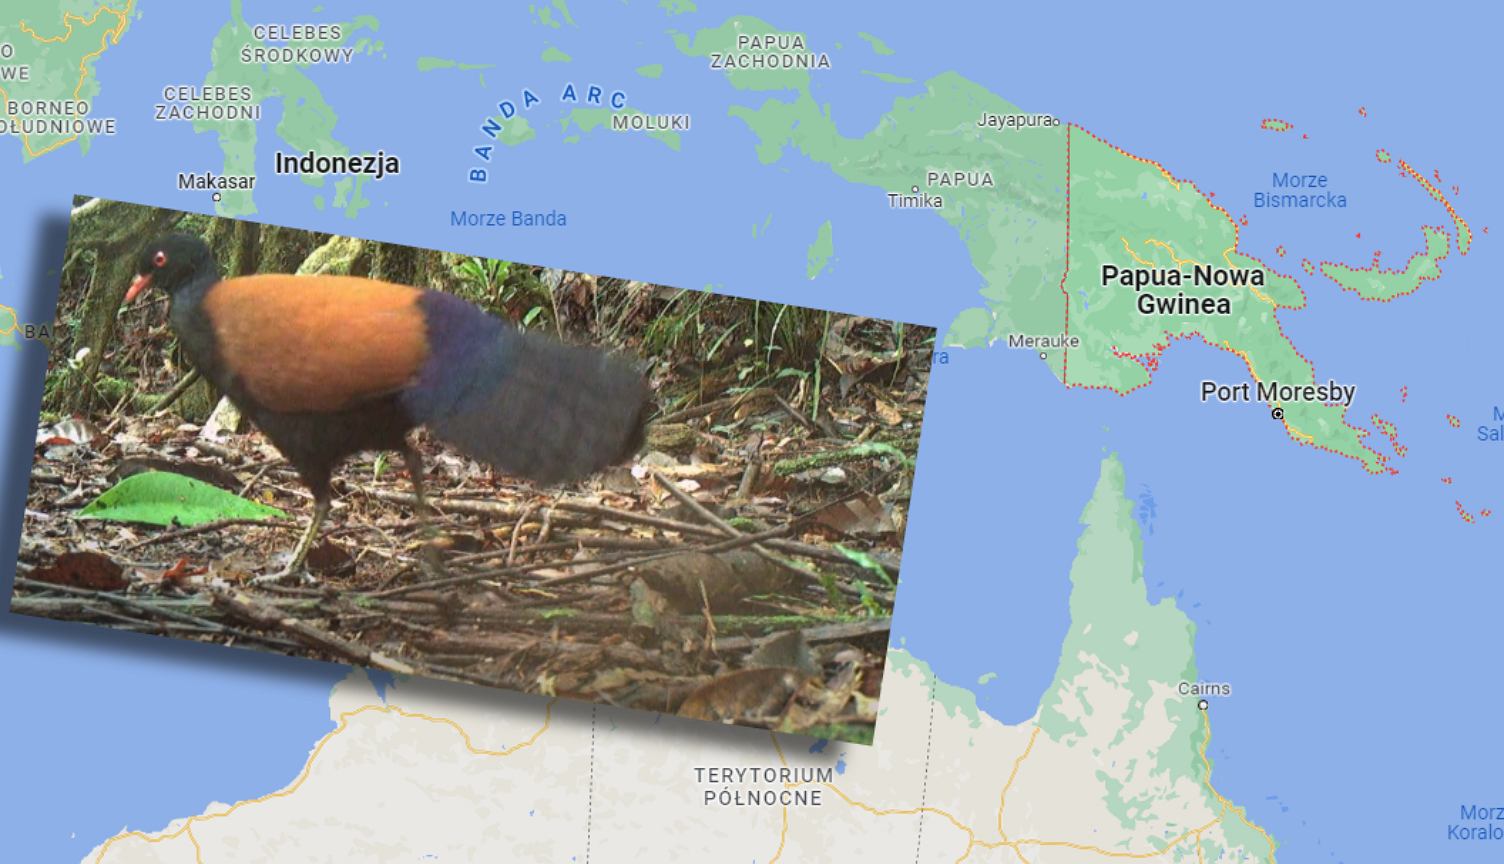 Papua New Guinea.  For the first time in 140 years, the black-necked pheasant was observed